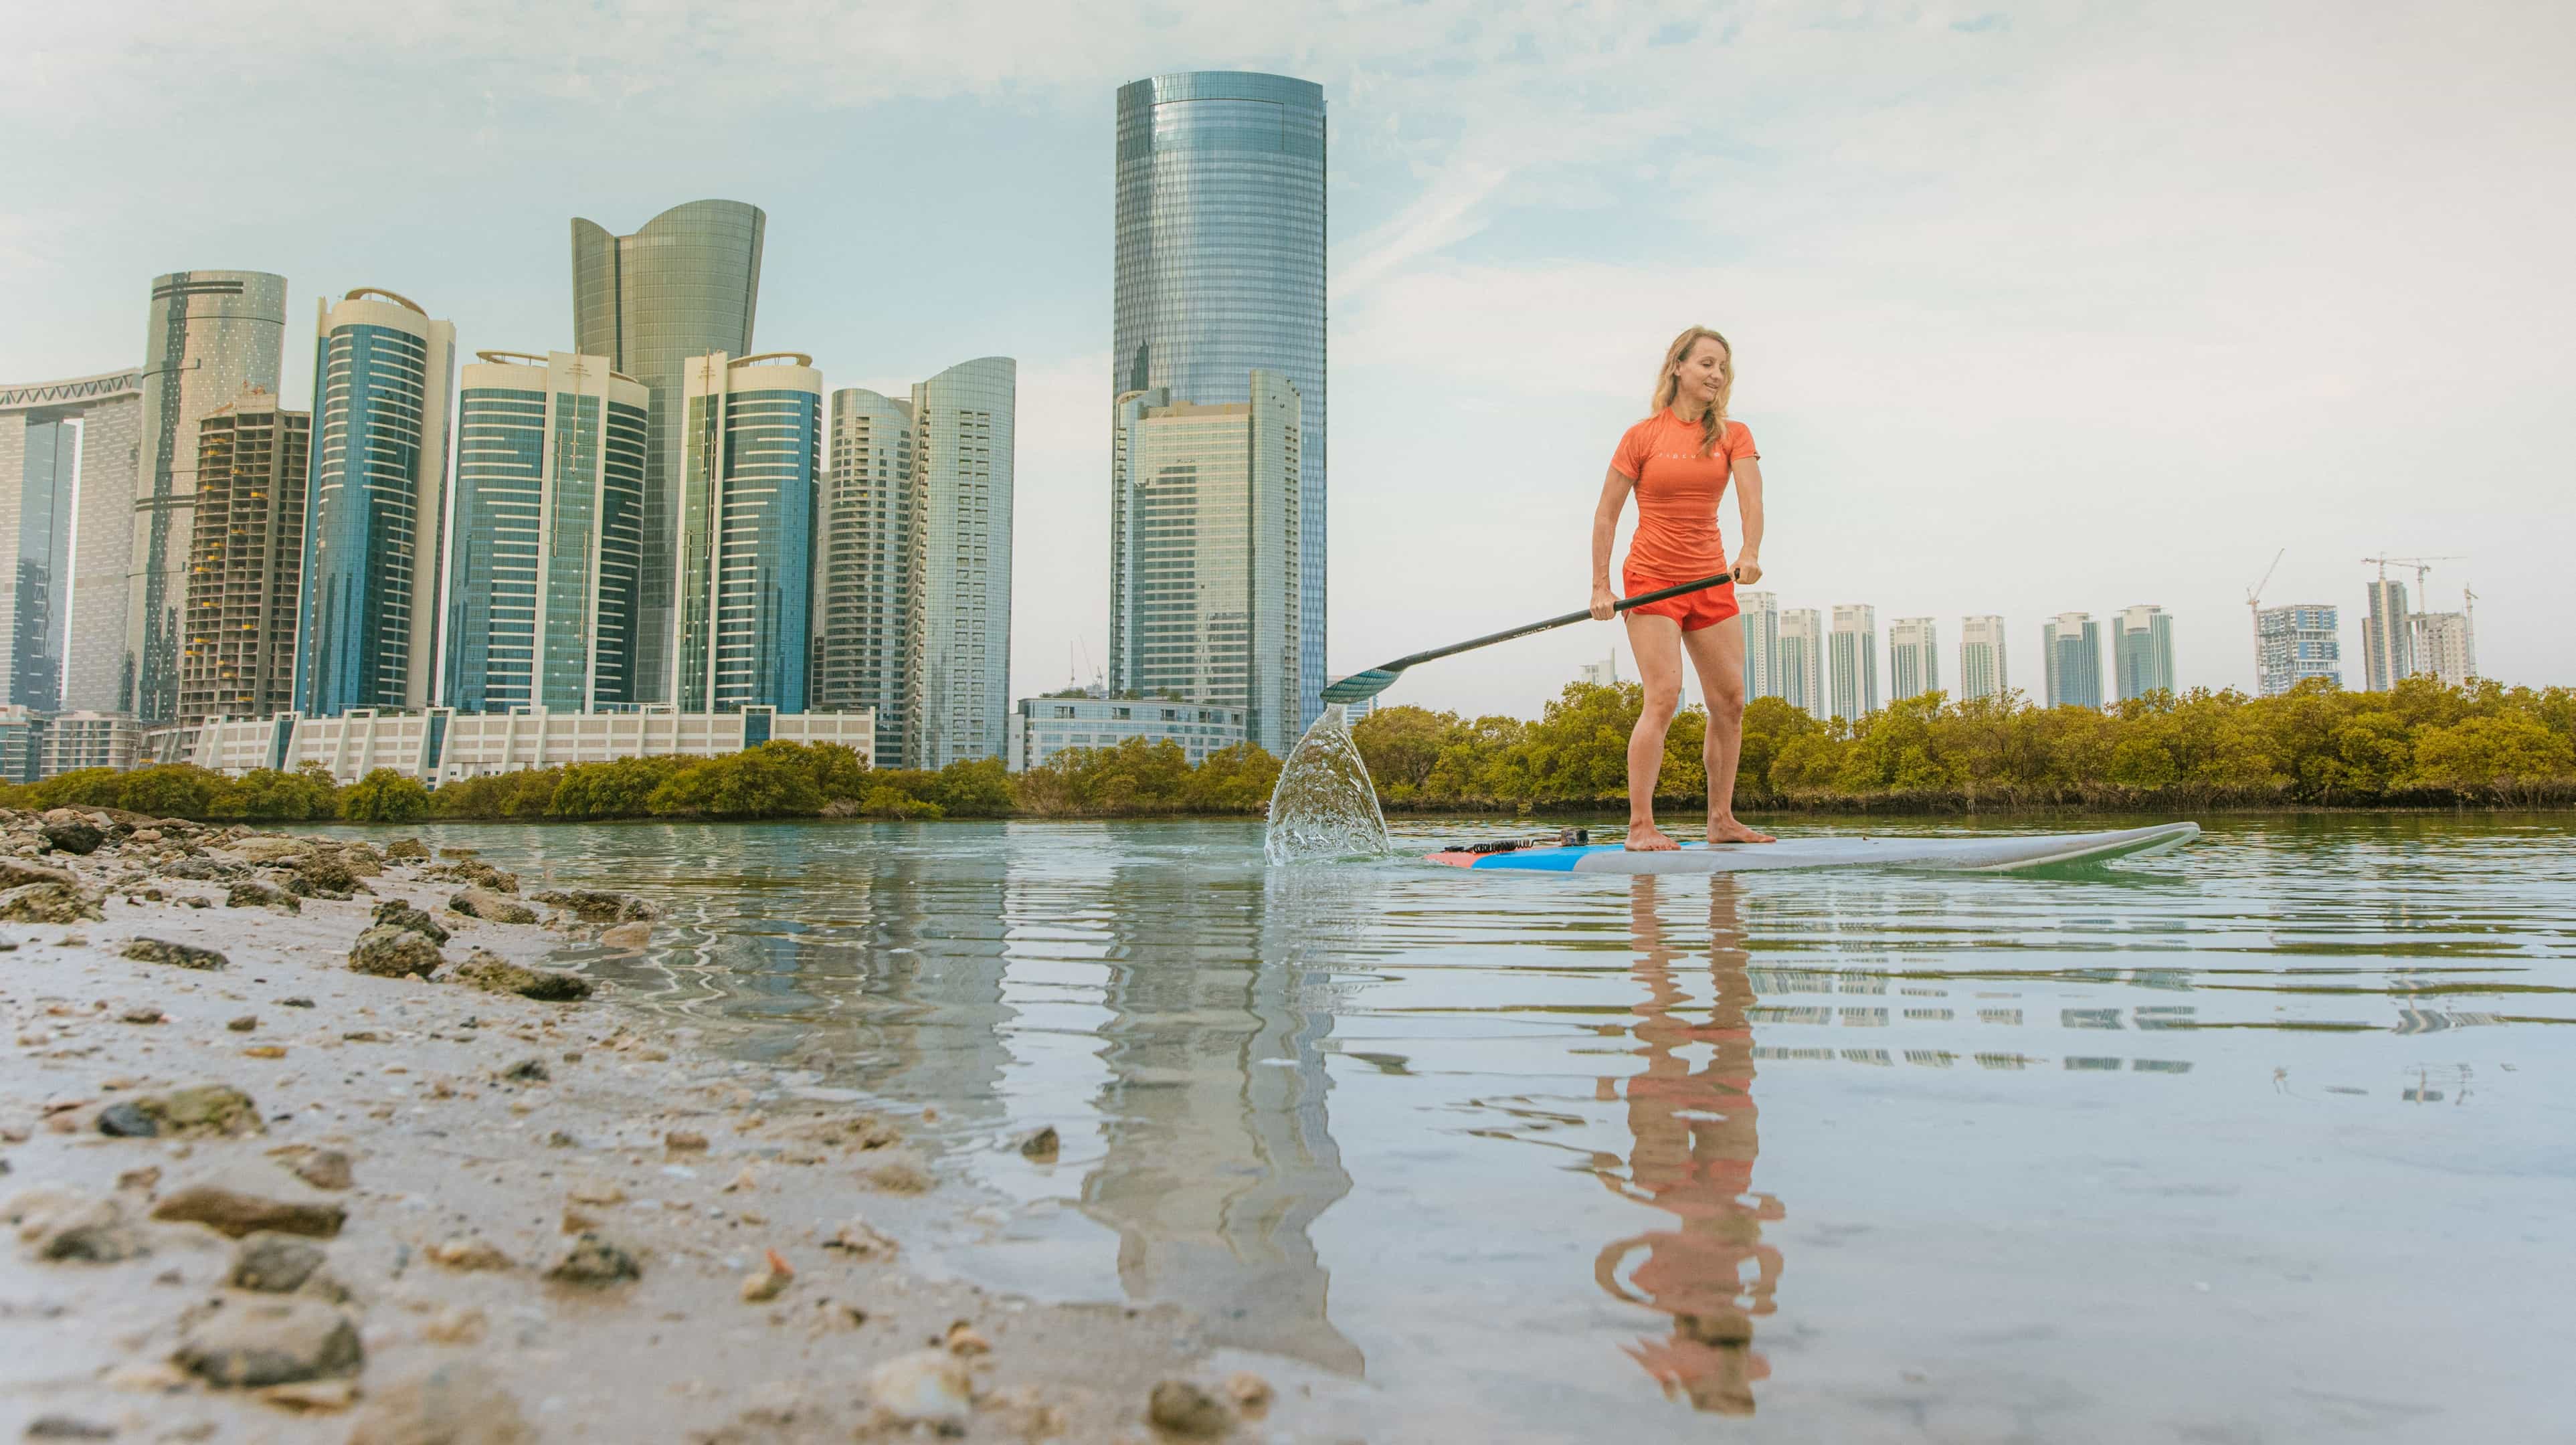 Stand-up paddleboarding (SUP)